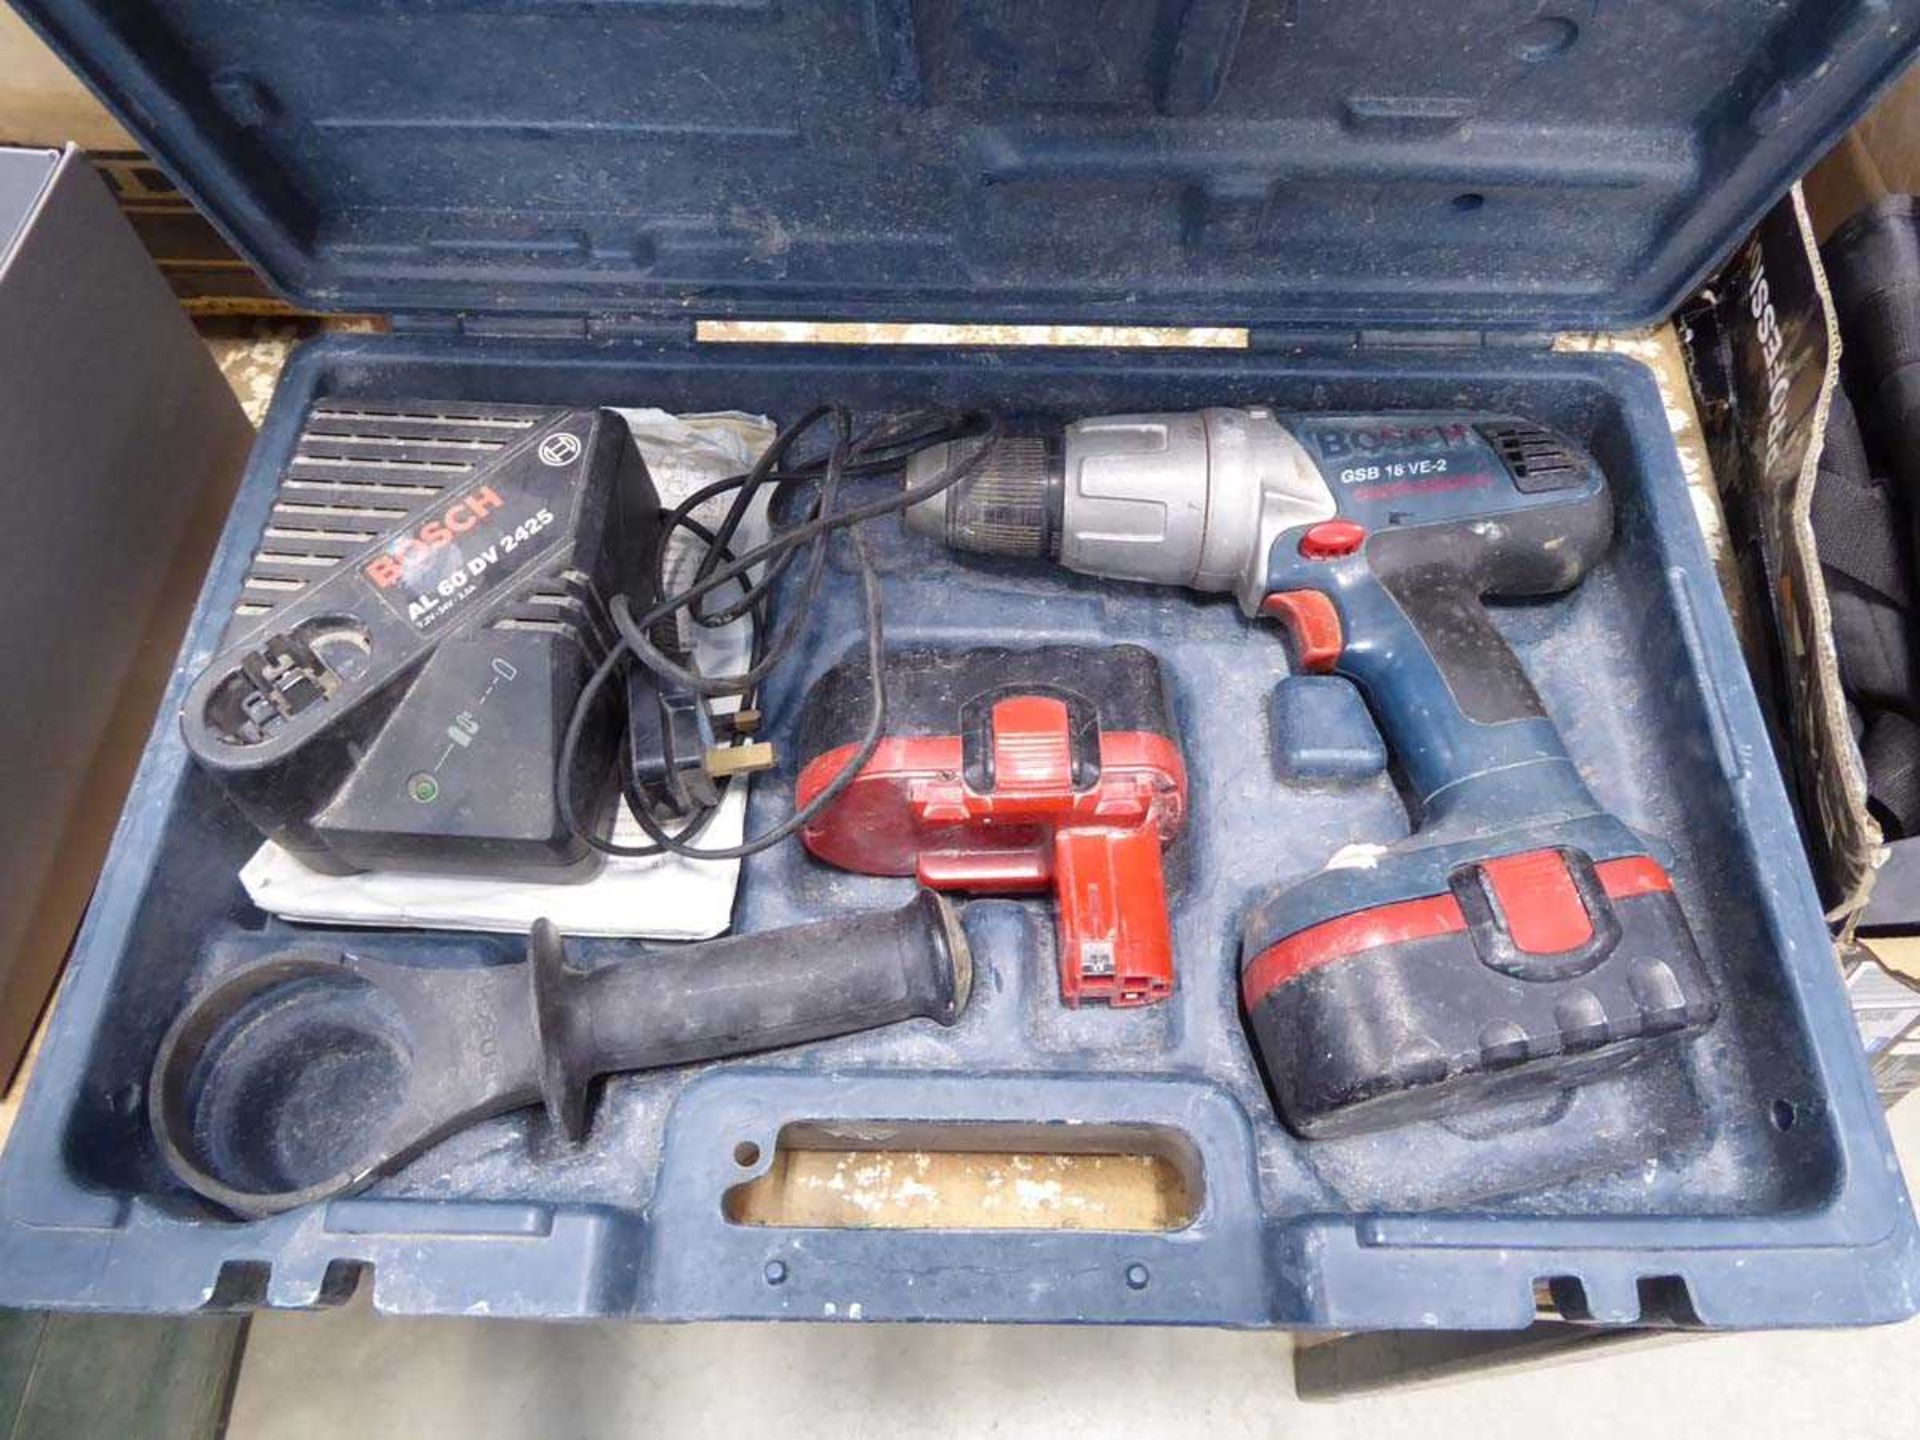 Bosch battery drill with 2 batteries and charger